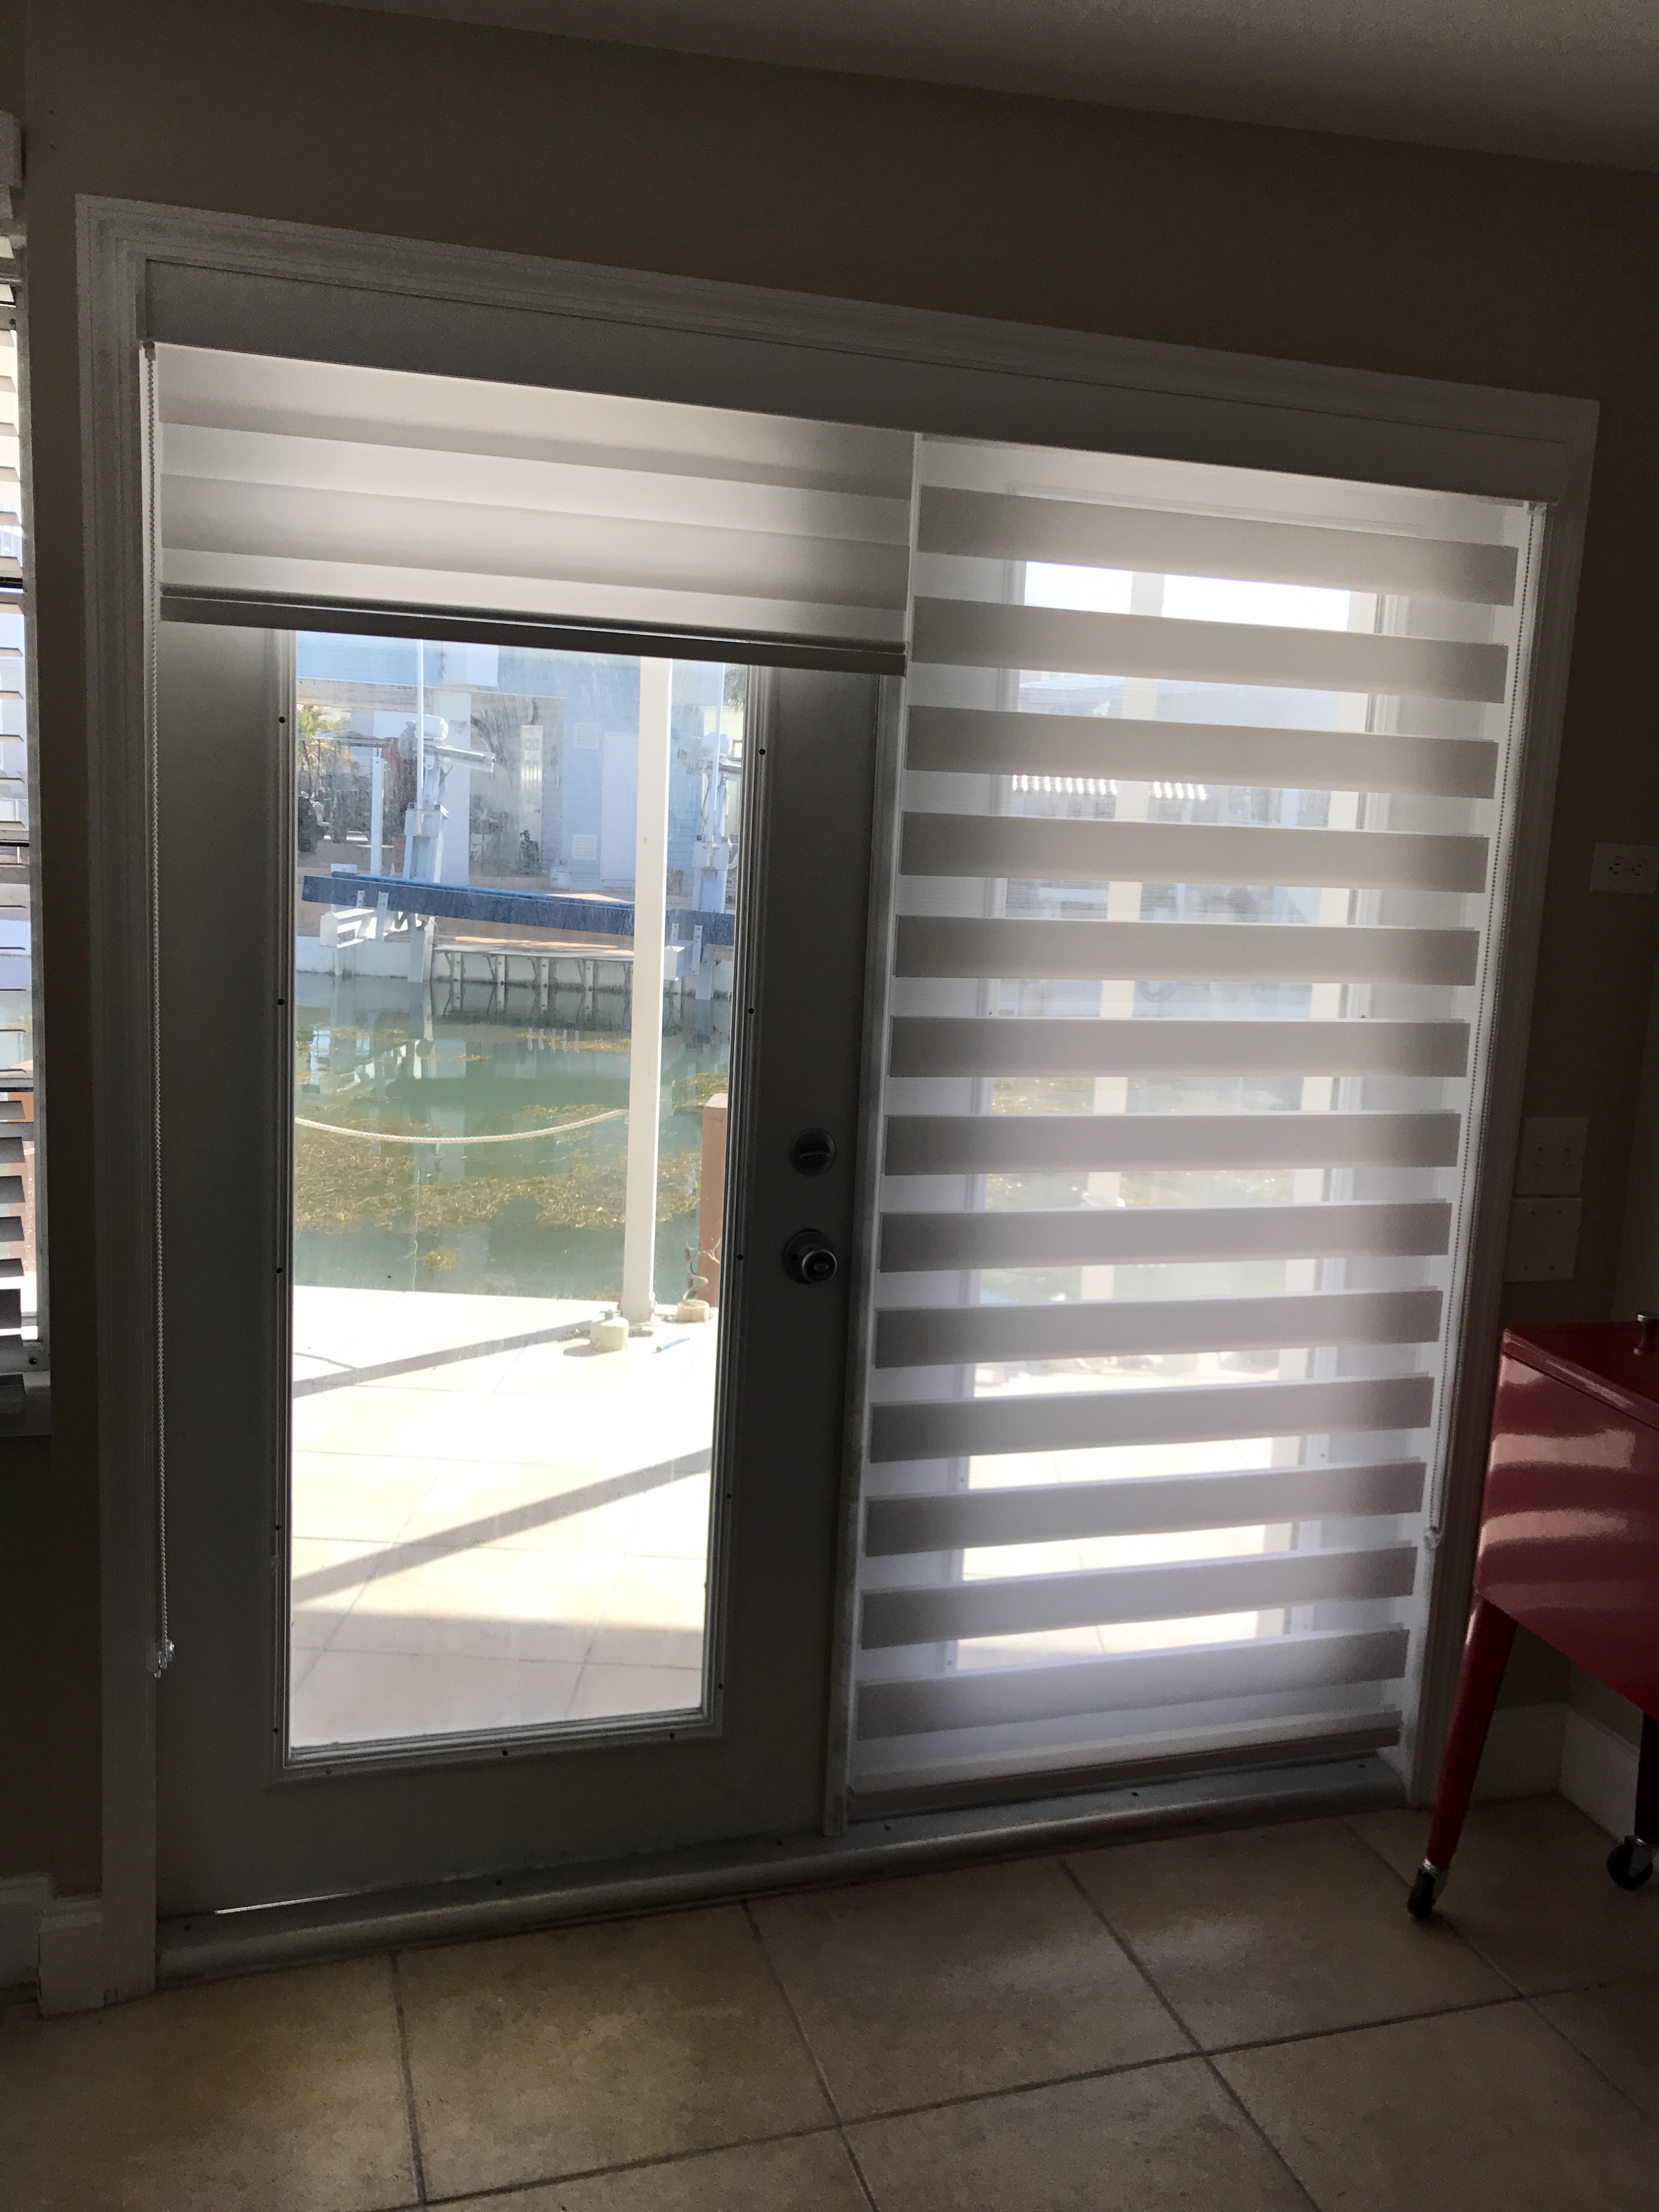 Zebra Illusion 2in1 Privacy Shades on French Doors | Door Blinds ...